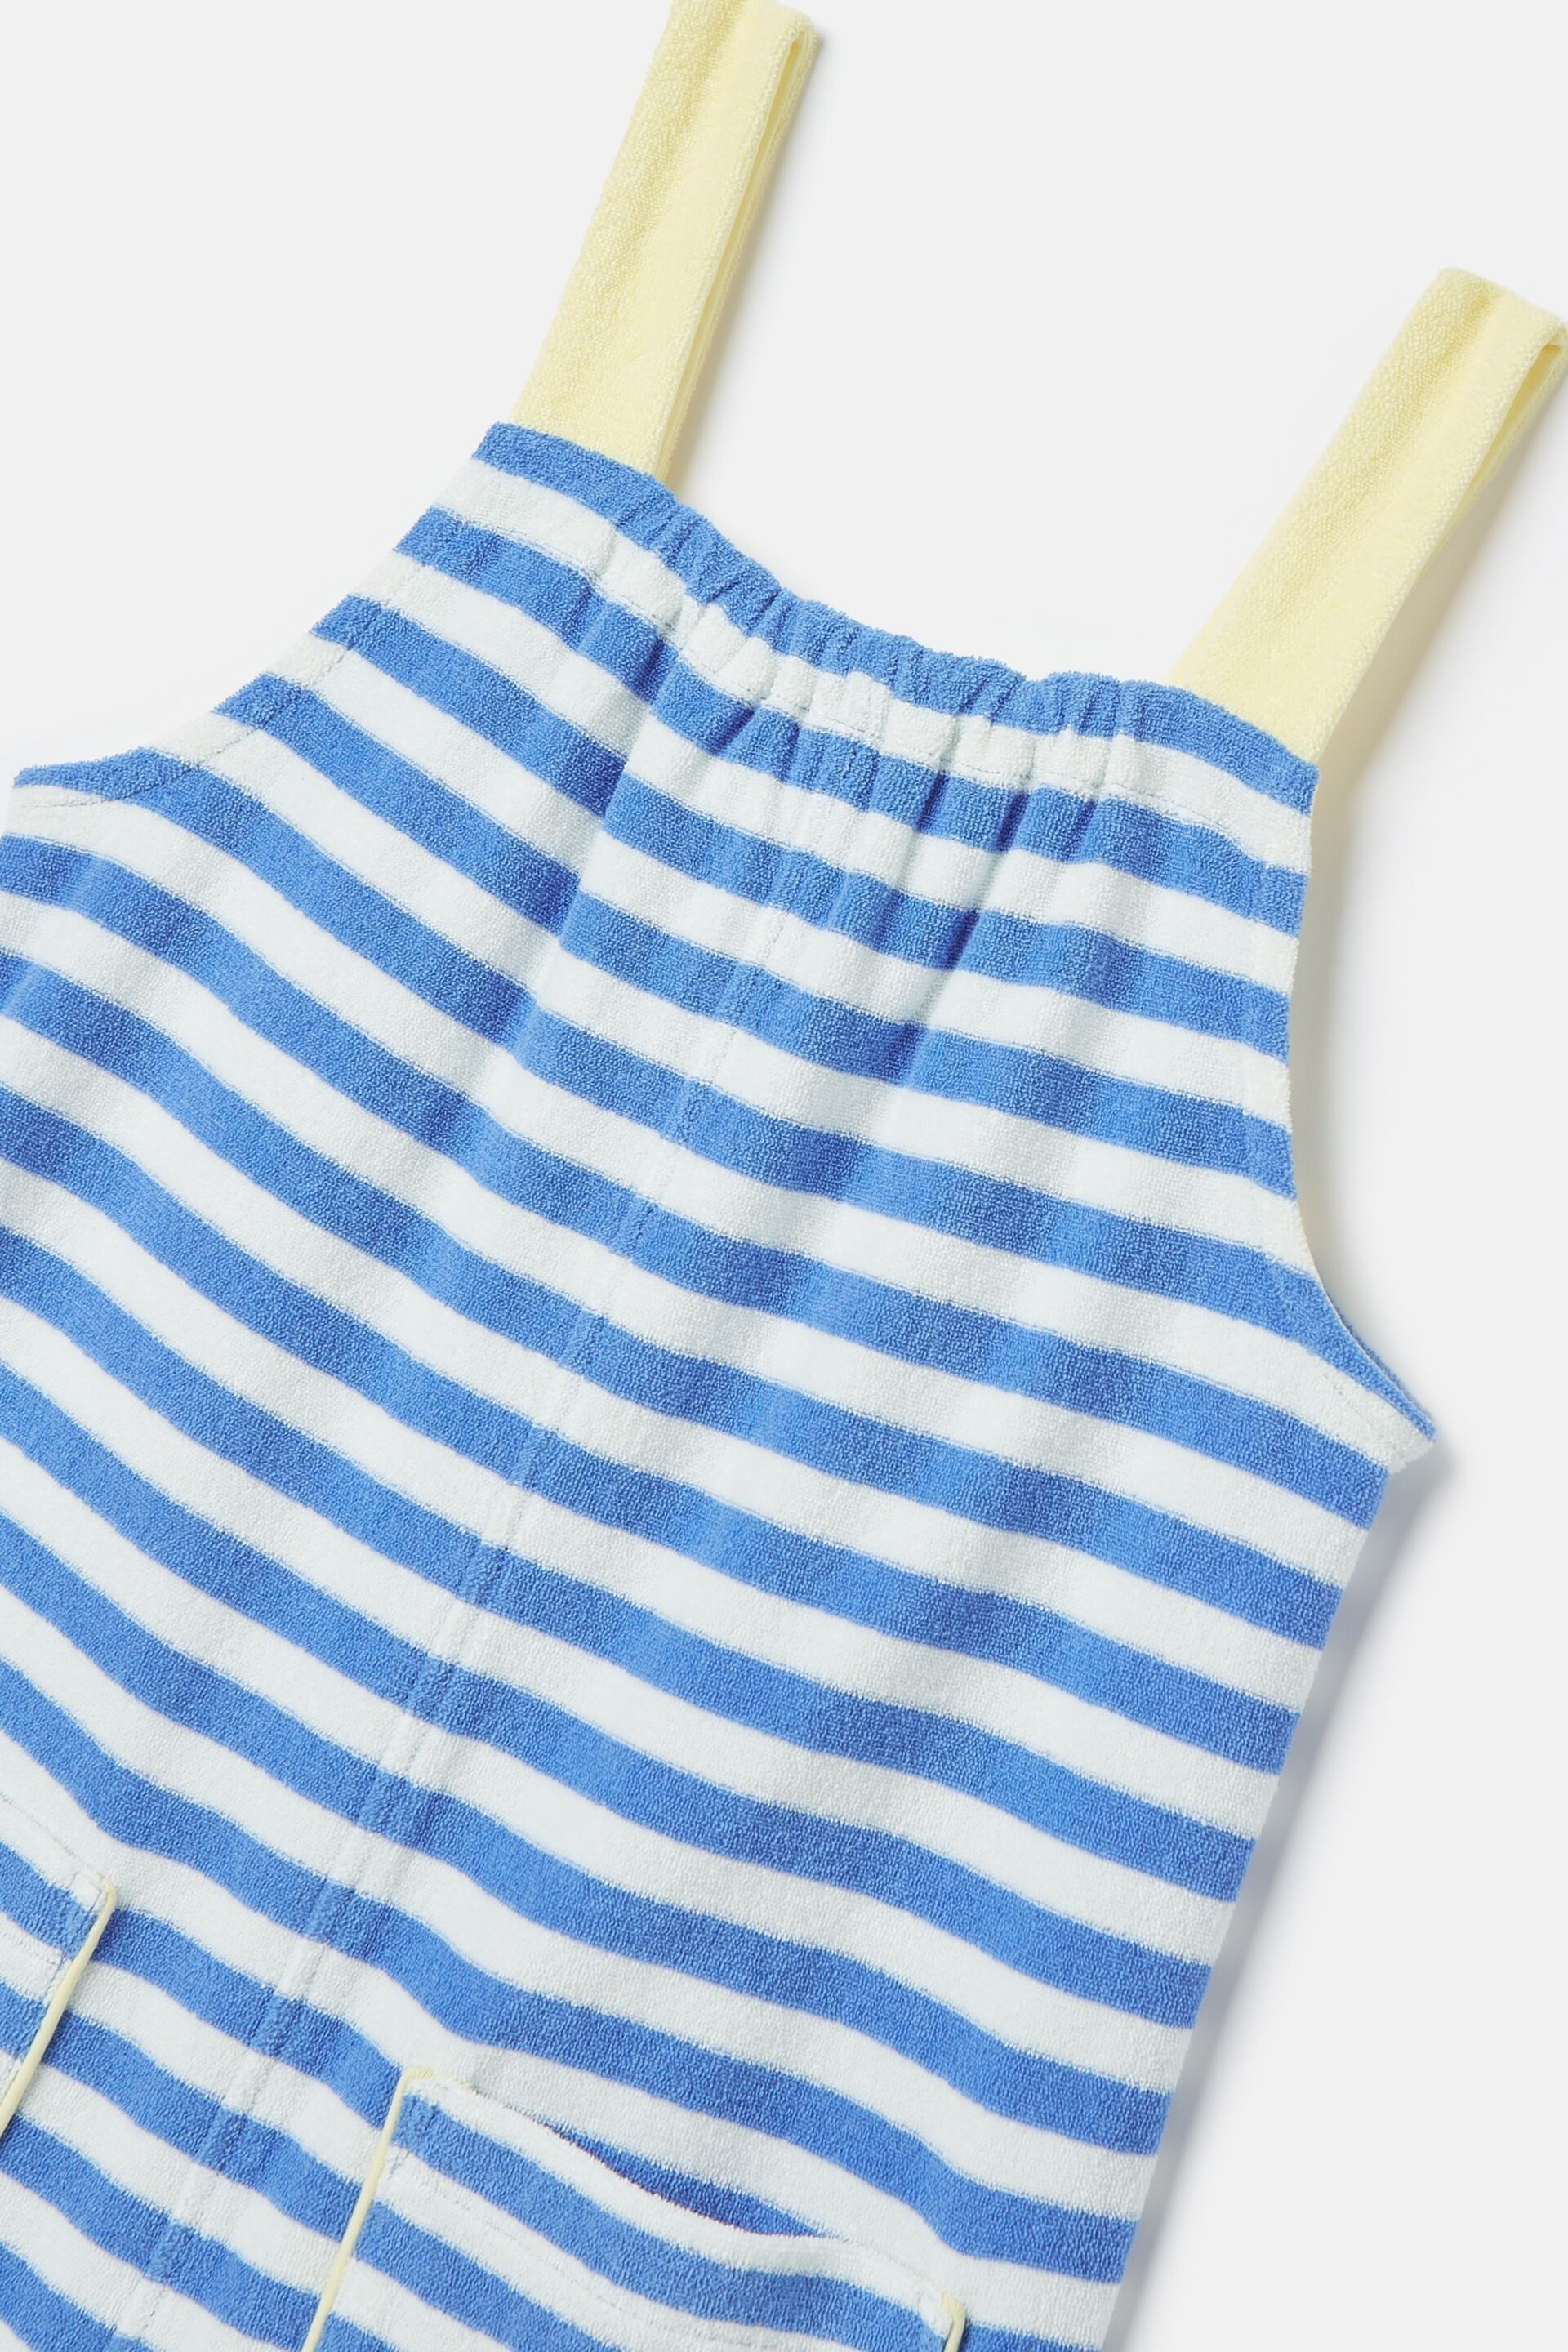 Joules By The Sea Blue Striped Towelling Playsuit - Image 3 of 5